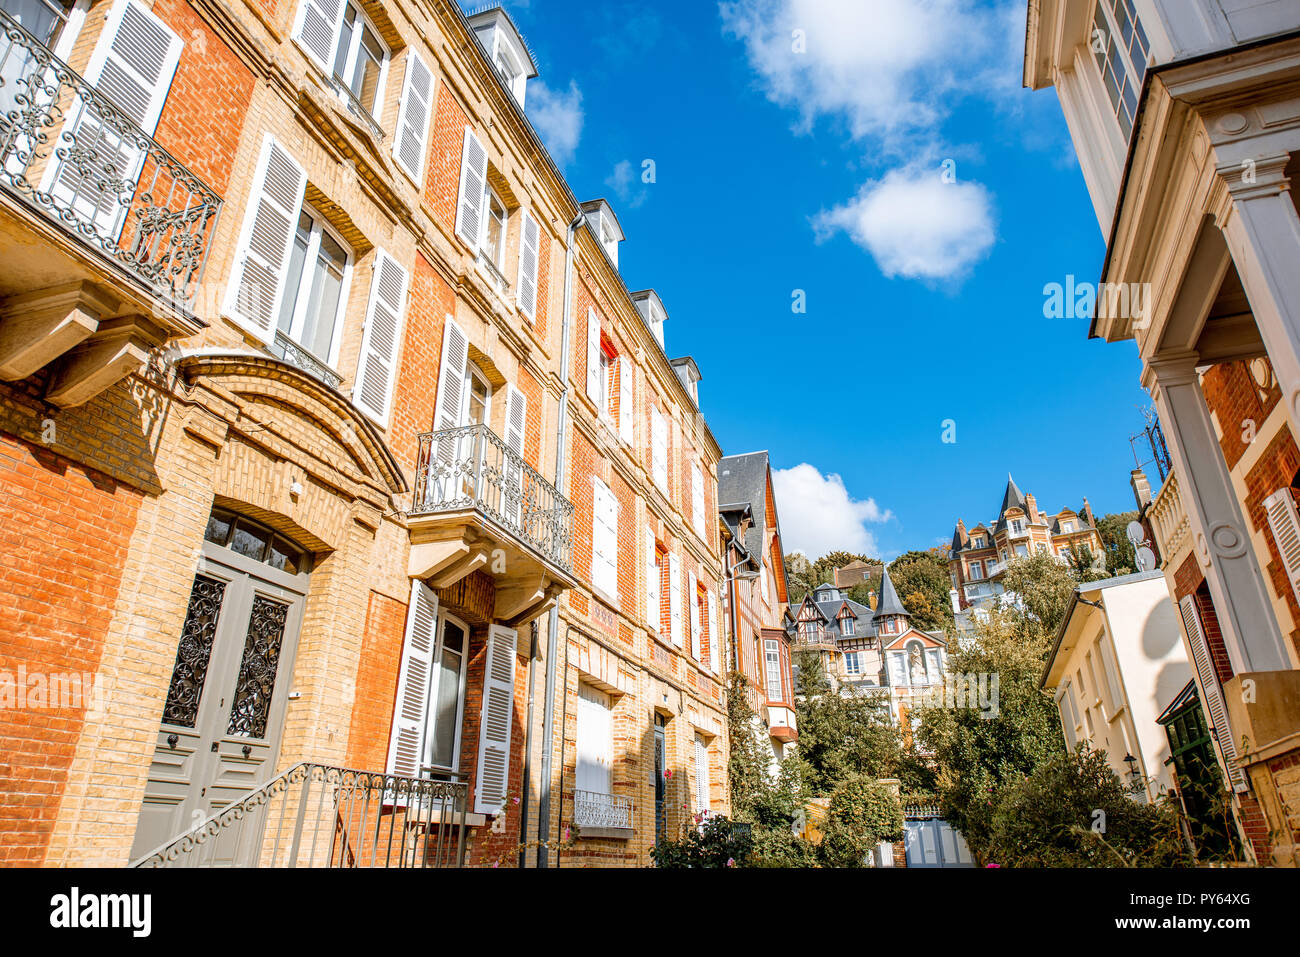 Street view with luxury buildings in the center of the old town of Trouville, famous french town in Normandy Stock Photo